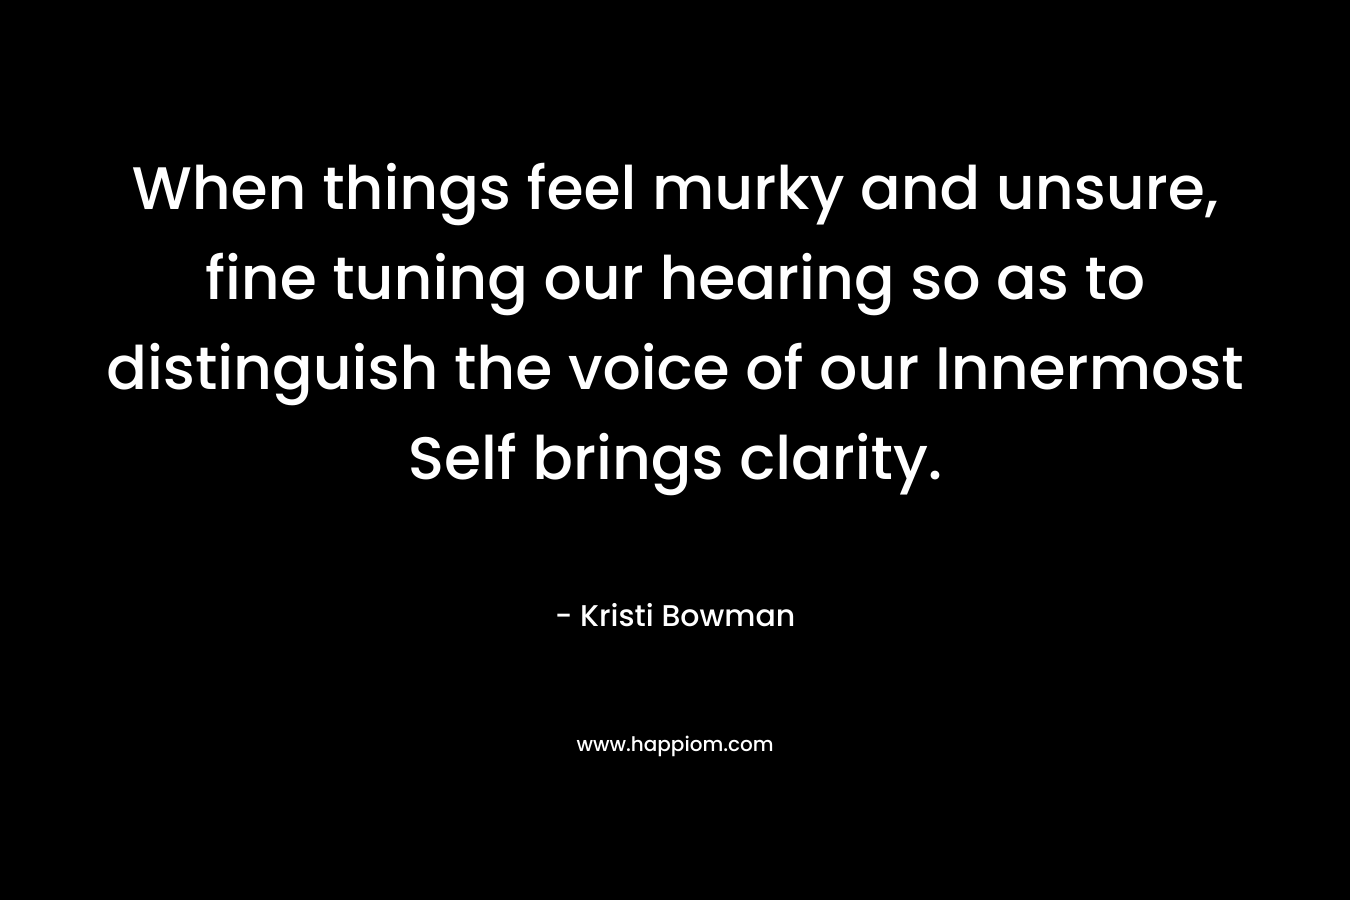 When things feel murky and unsure, fine tuning our hearing so as to distinguish the voice of our Innermost Self brings clarity.